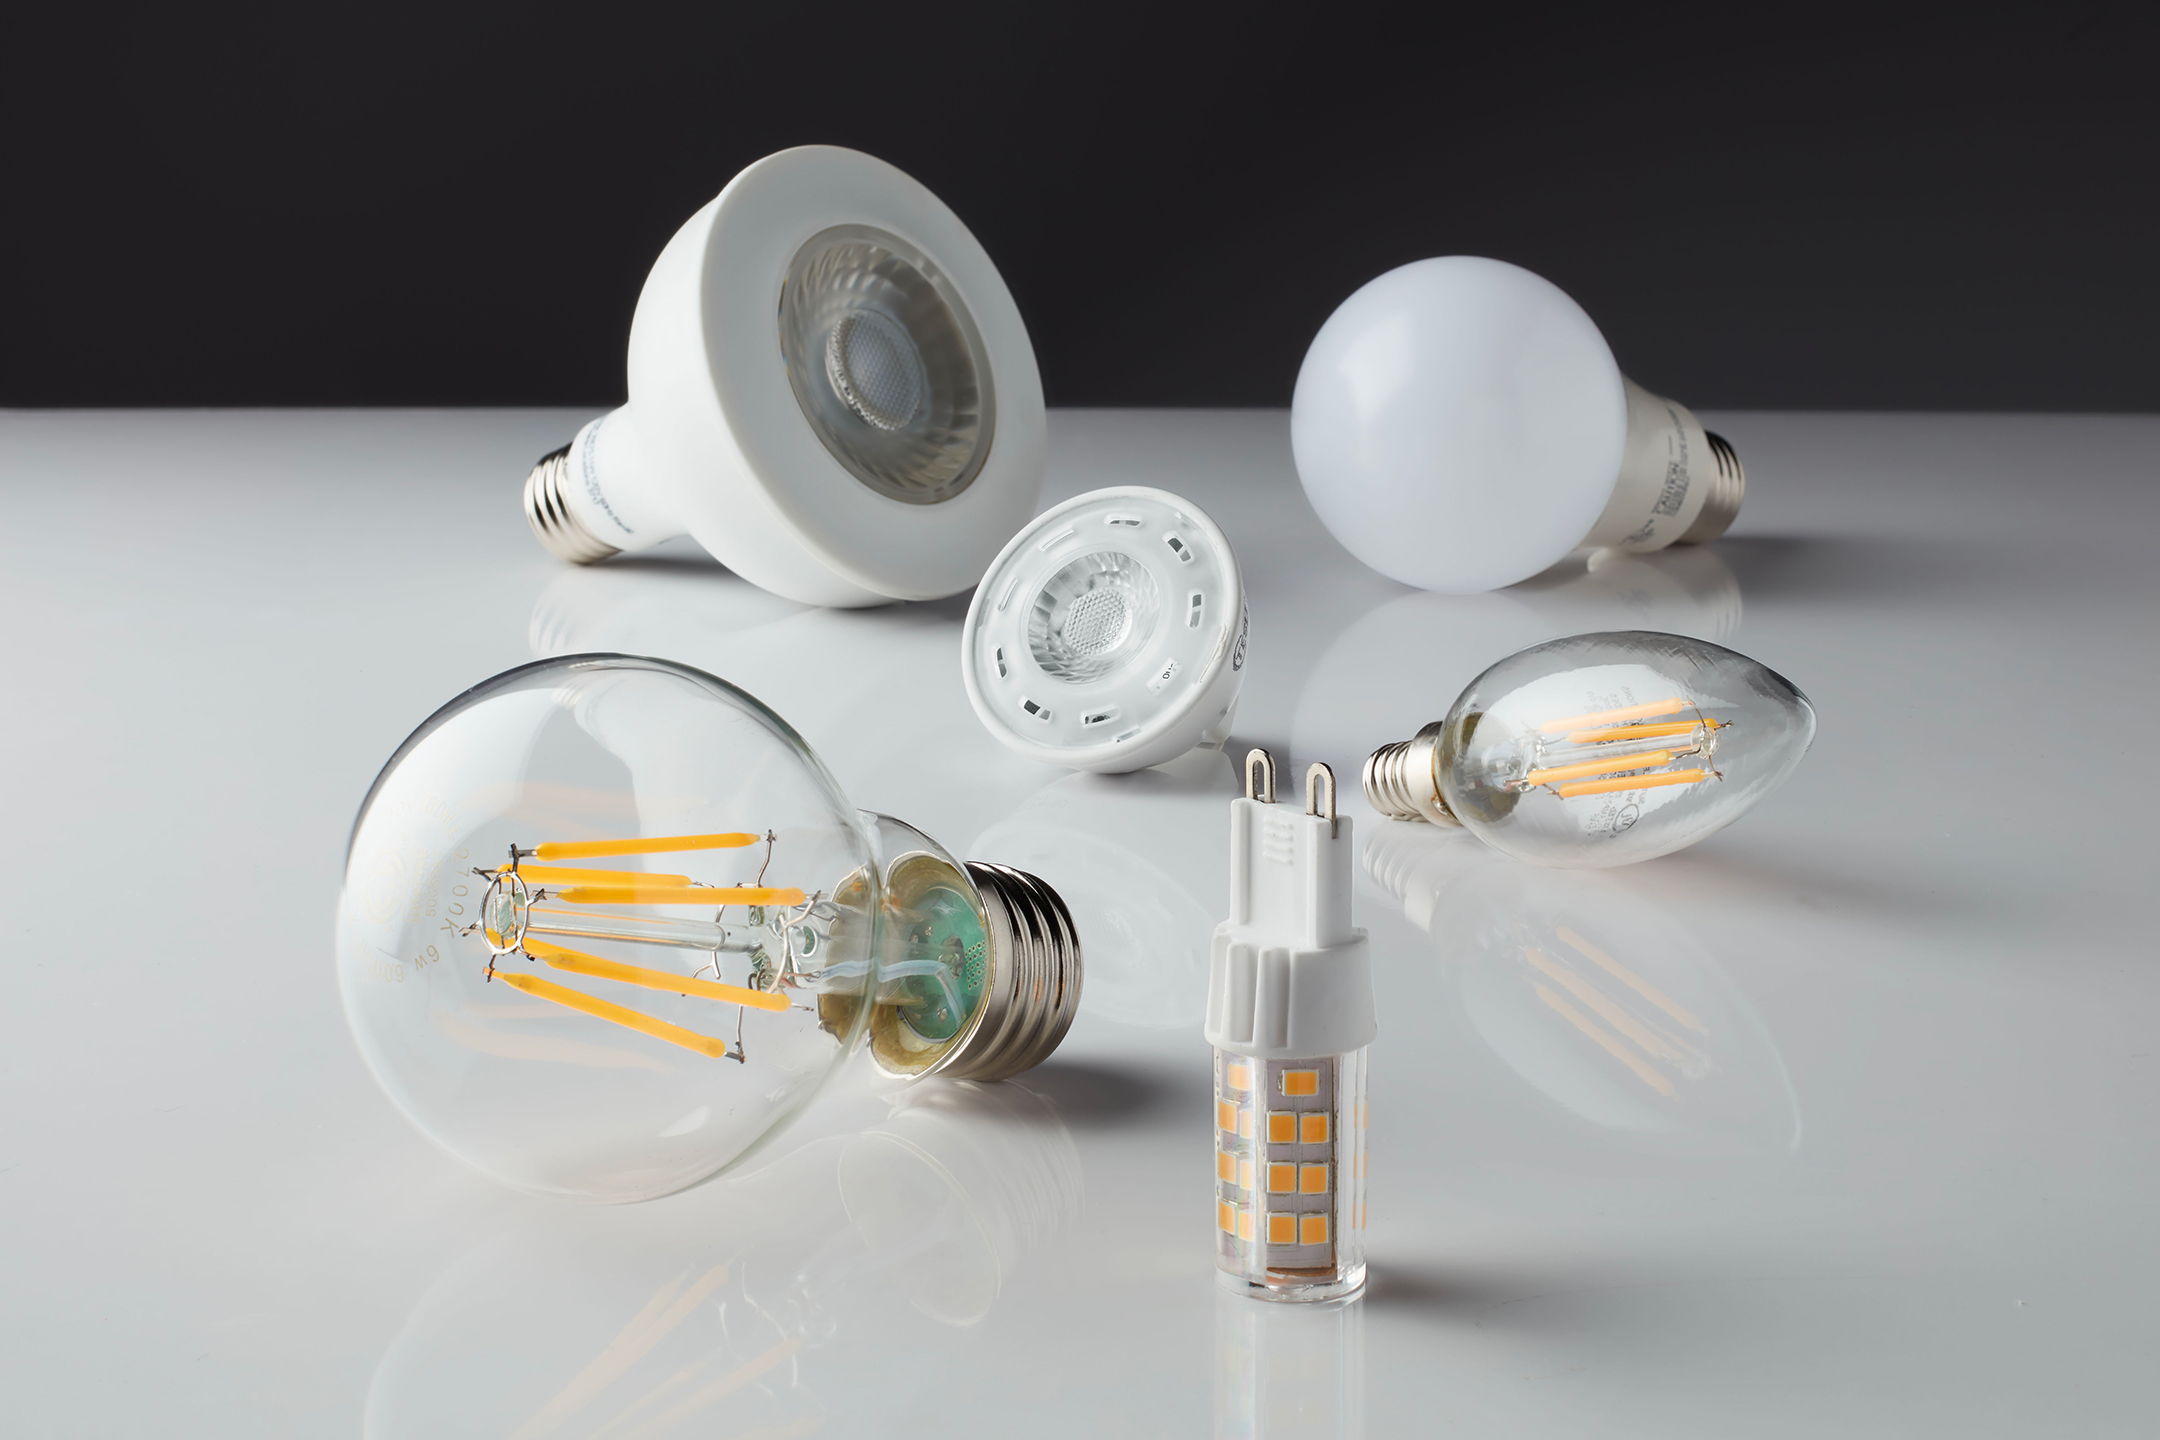 The Most Common Light Bulb Questions A Faq Guide - Do You Need Special Light Bulbs For Ceiling Fans